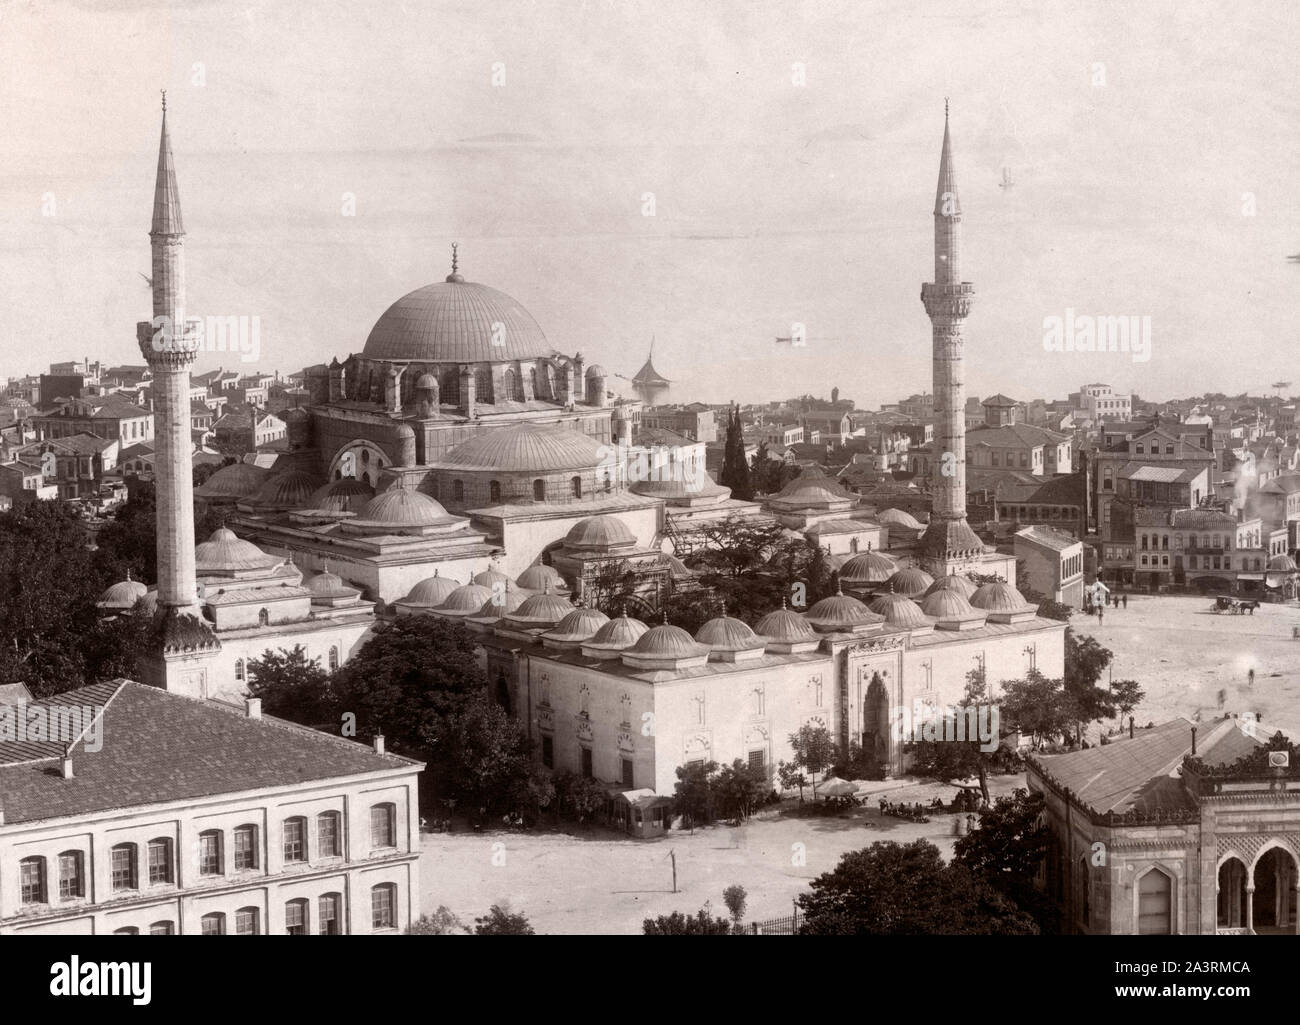 View of the Bayazit Camii mosque and the Golden Horn in background, Istanbul, Turkey. 19th century Stock Photo